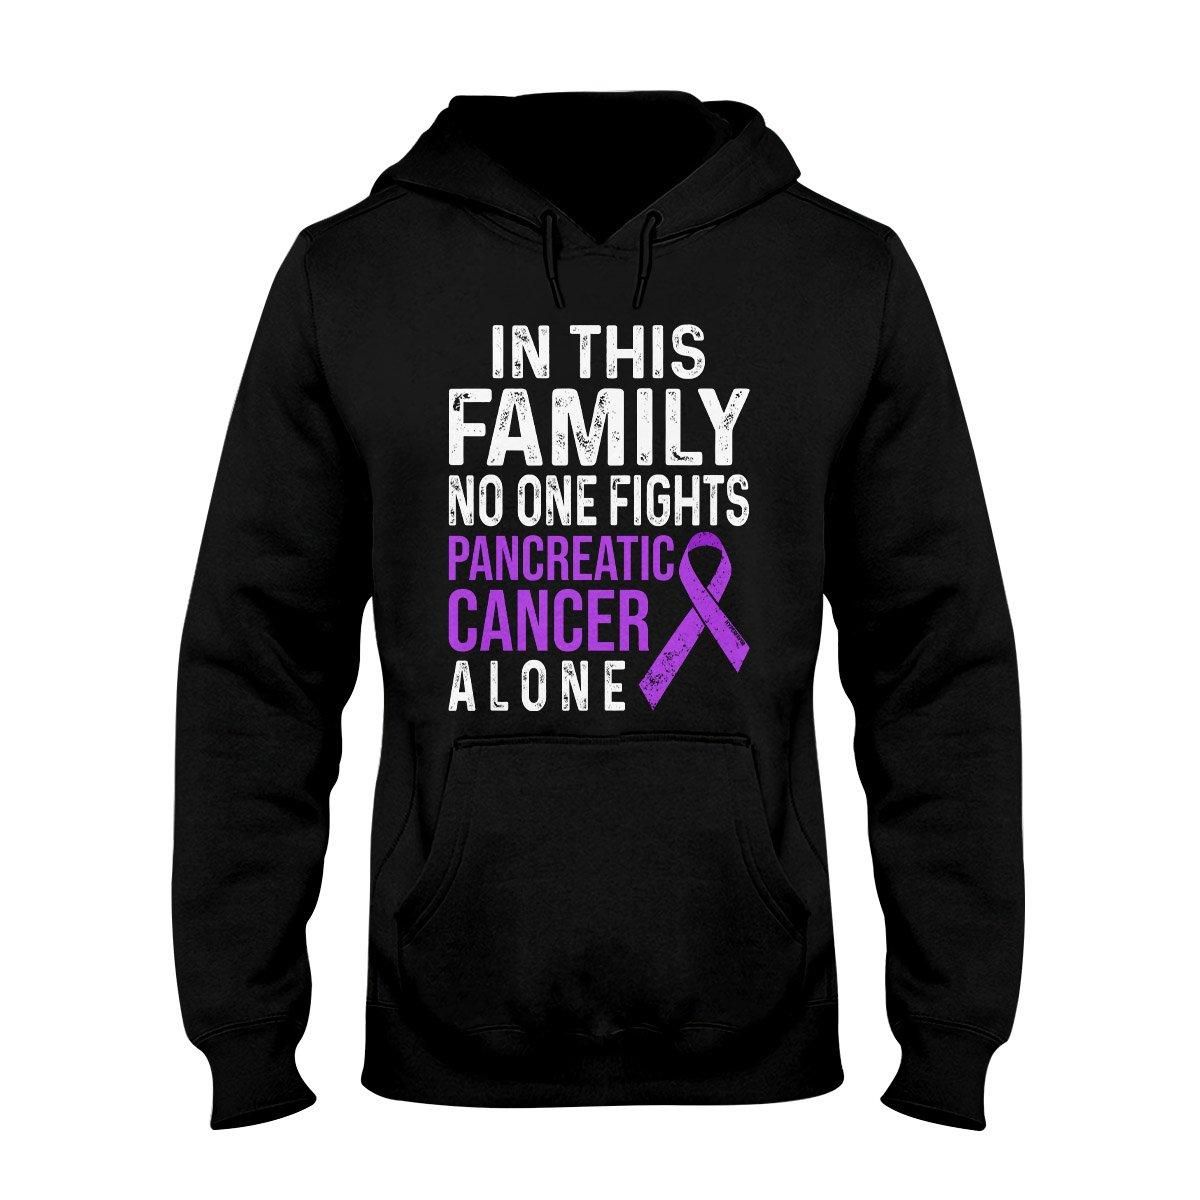 No One Fights Alone Pancreatic Cancer EZ01 0909 Hoodie